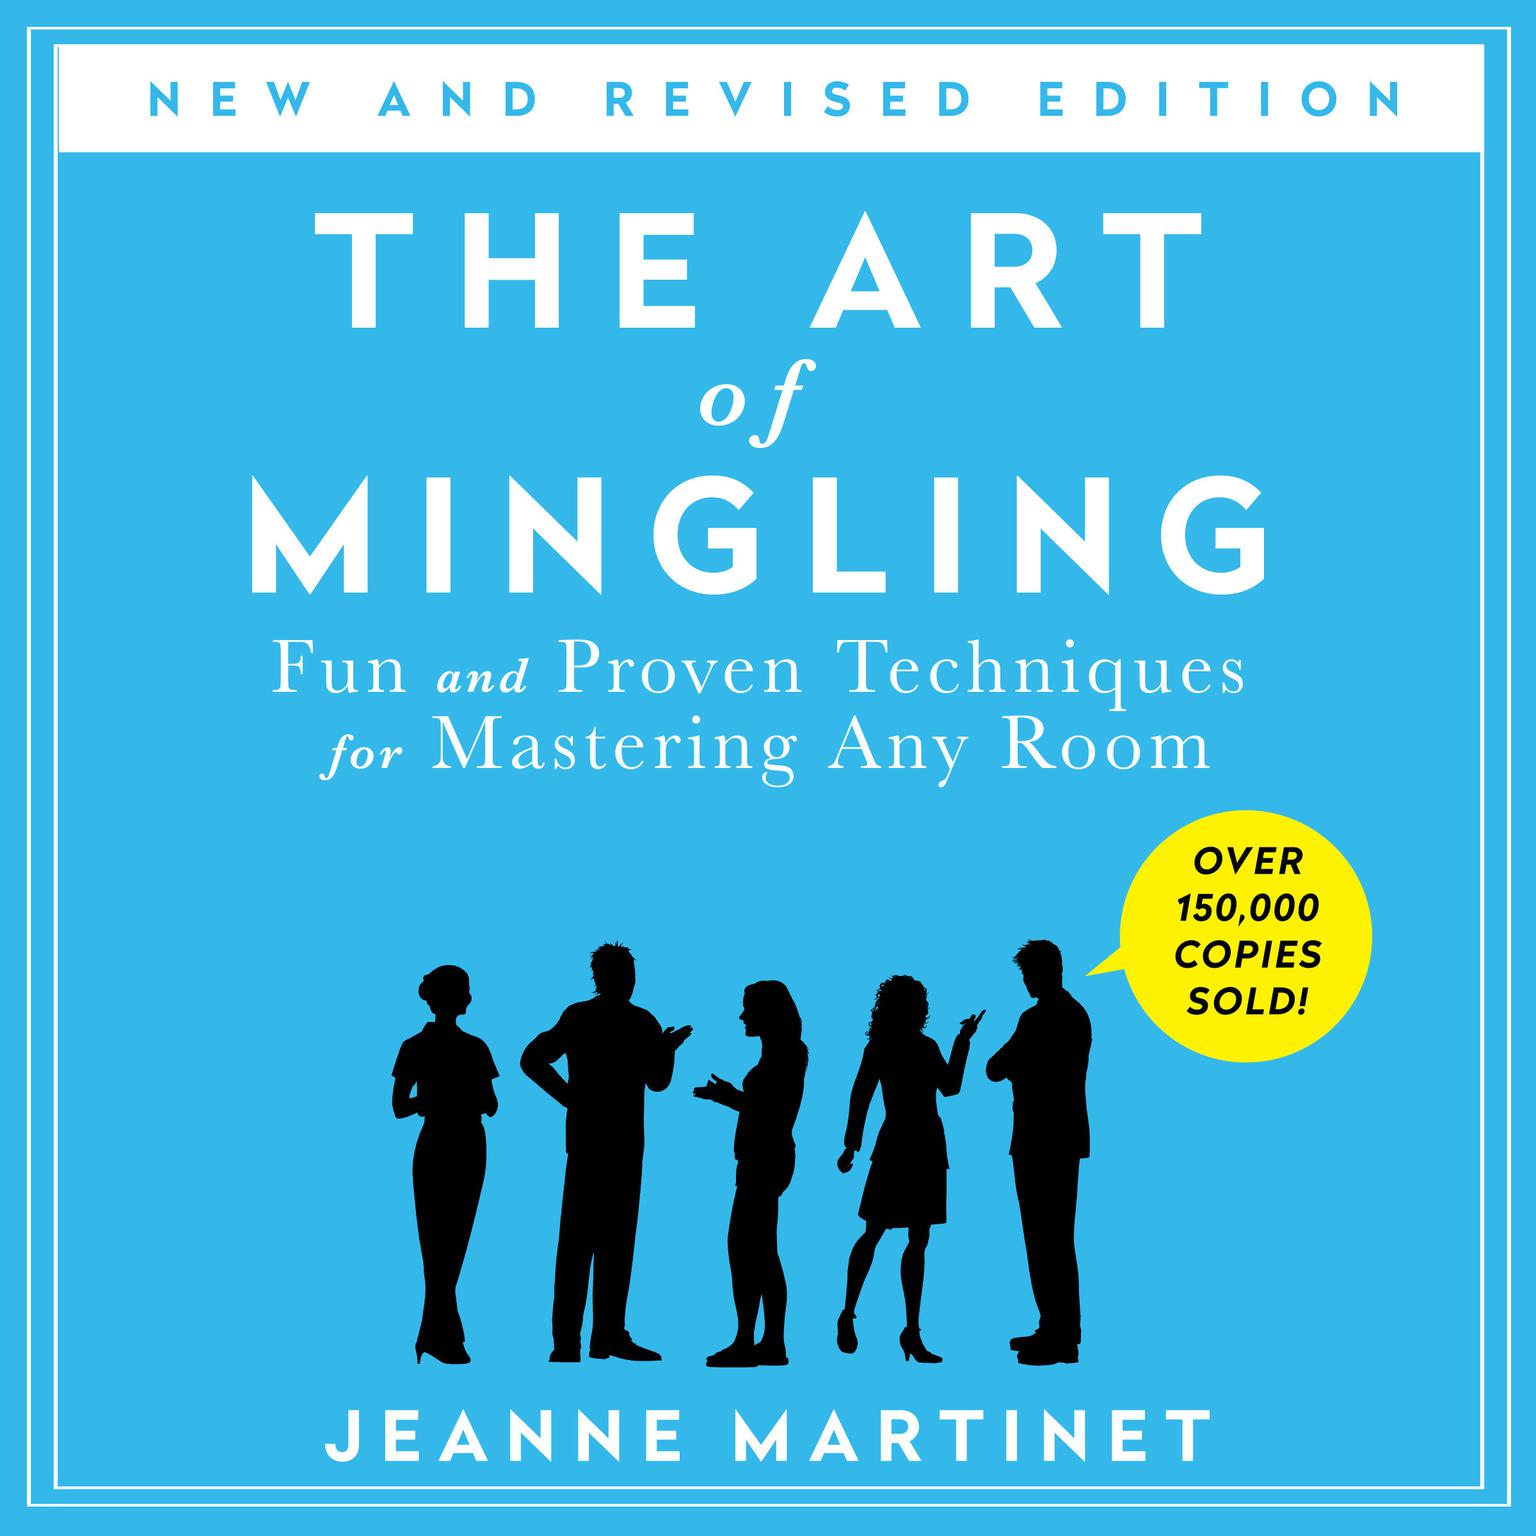 The Art of Mingling, Third Edition: Fun and Proven Techniques for Mastering Any Room Audiobook, by Jeanne Martinet